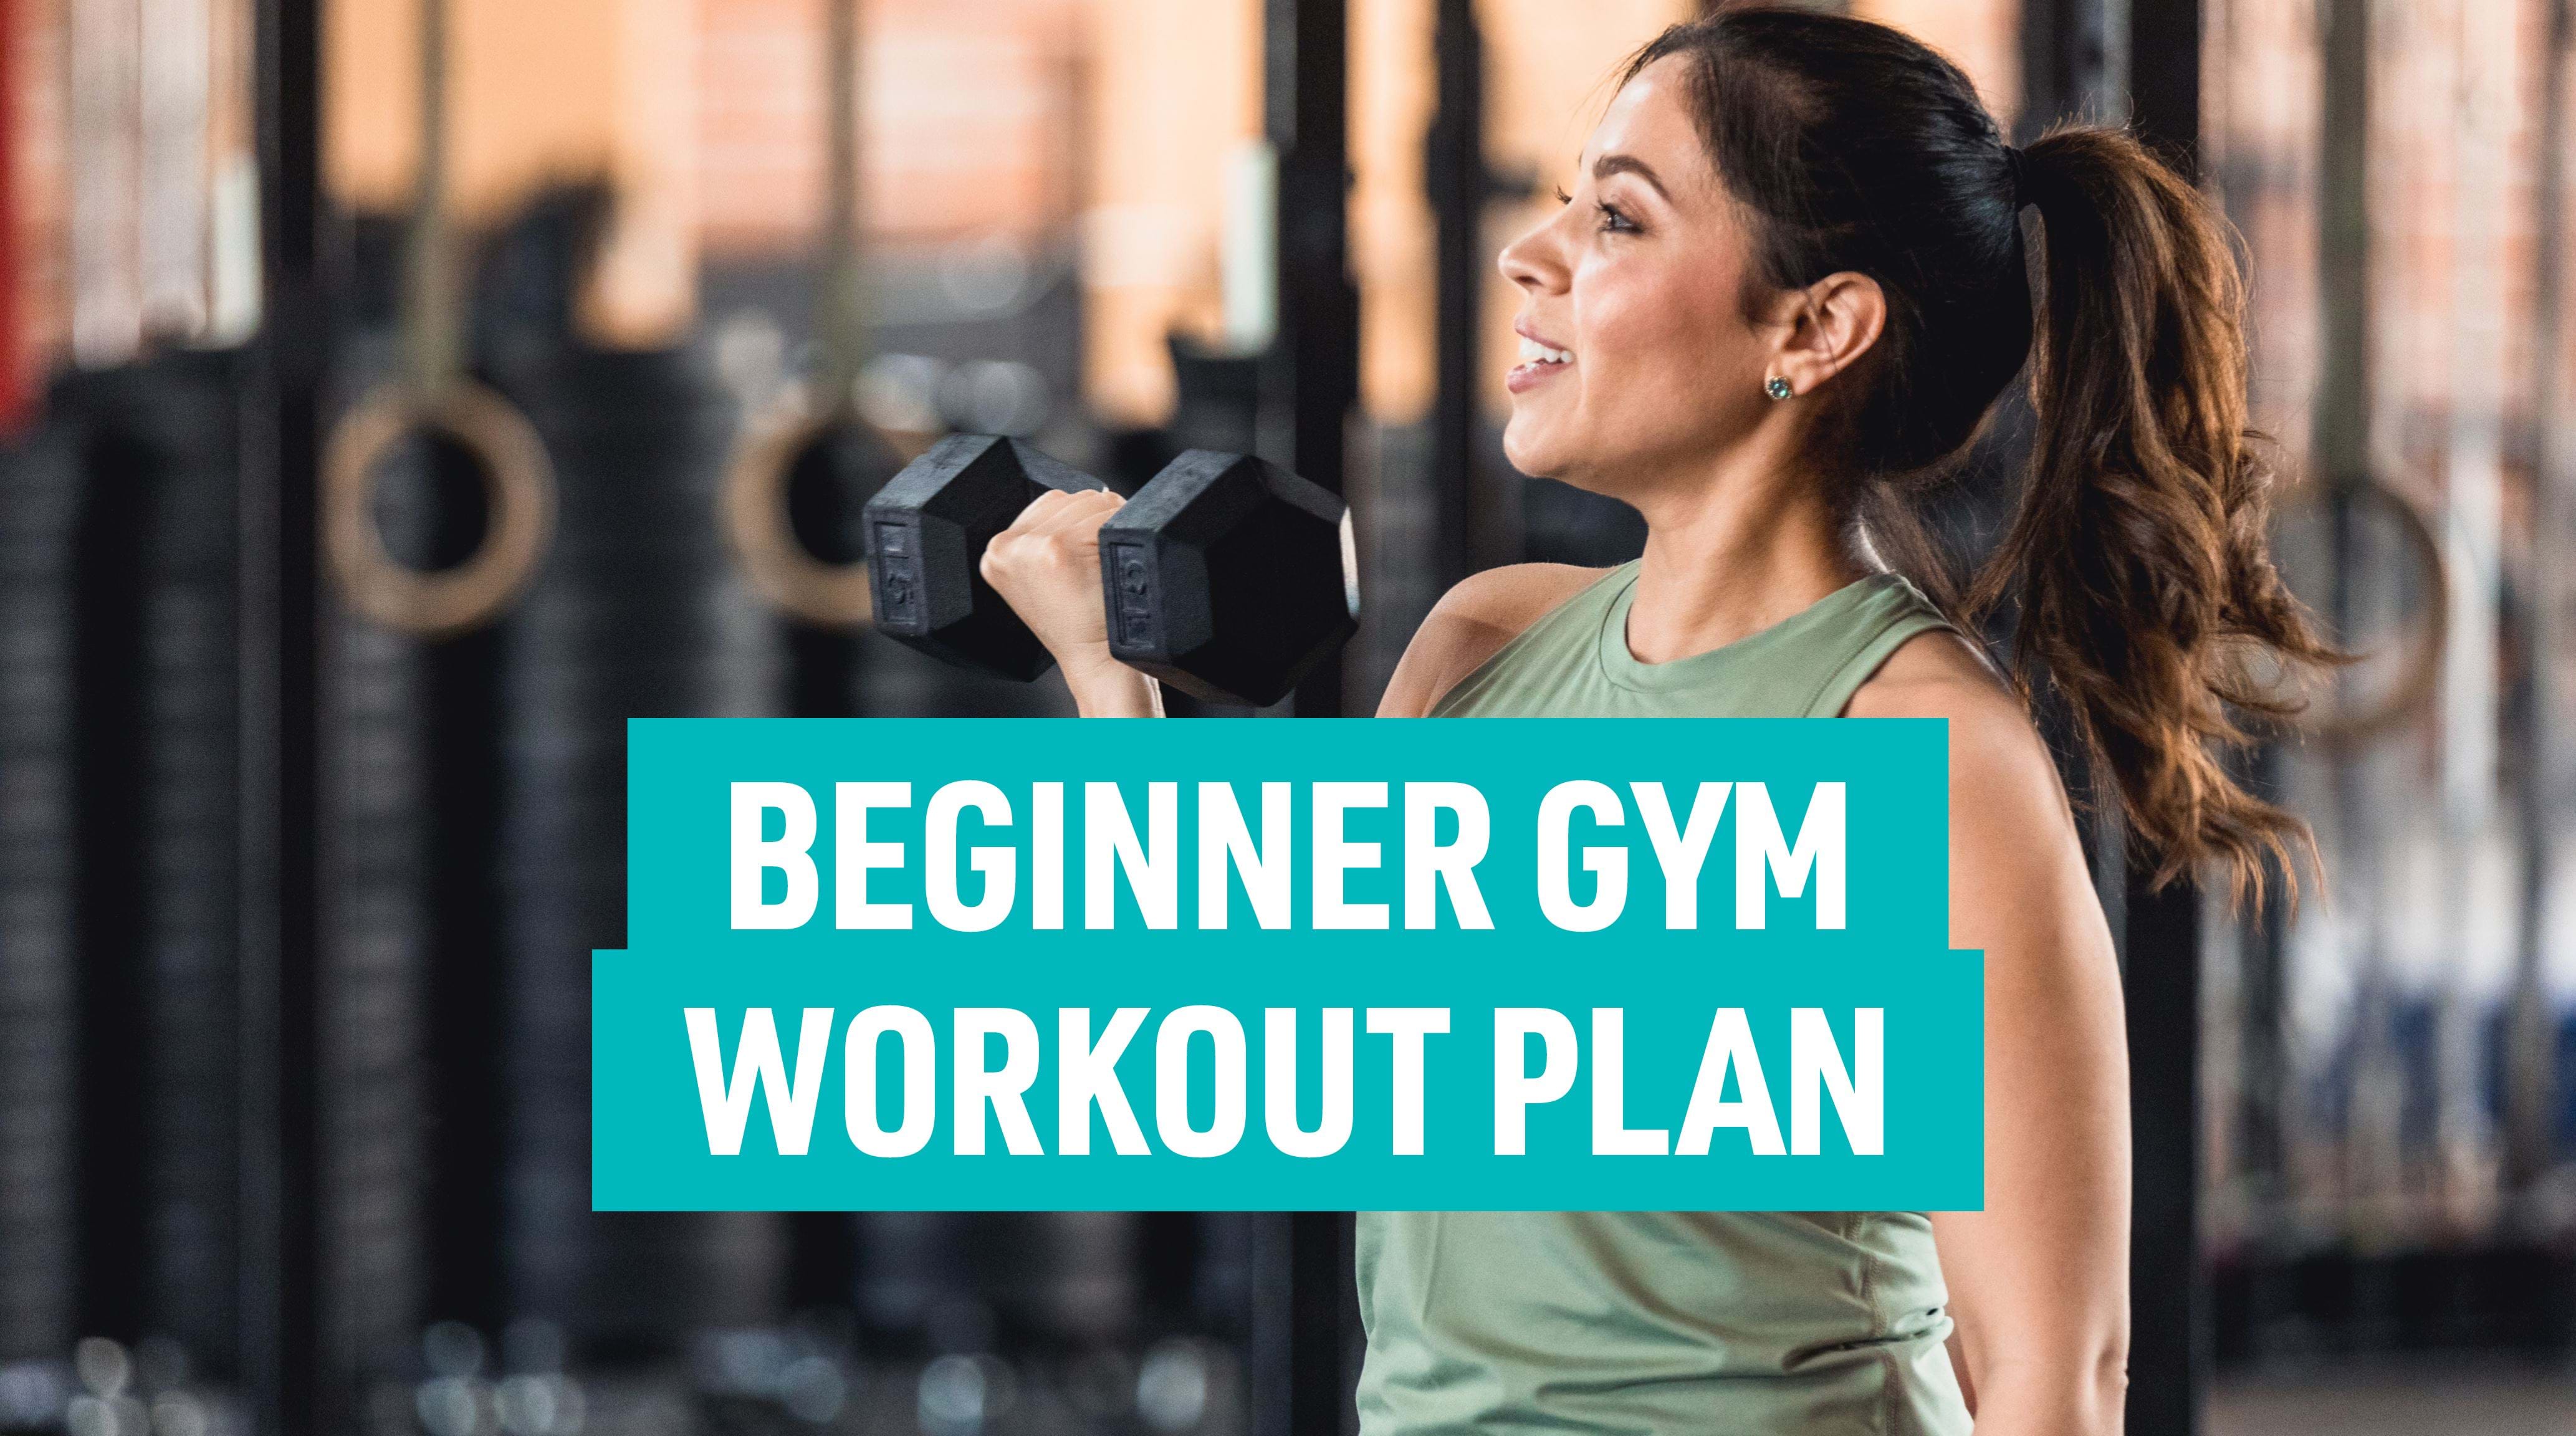 The Best Gym Workout Plans for Beginners